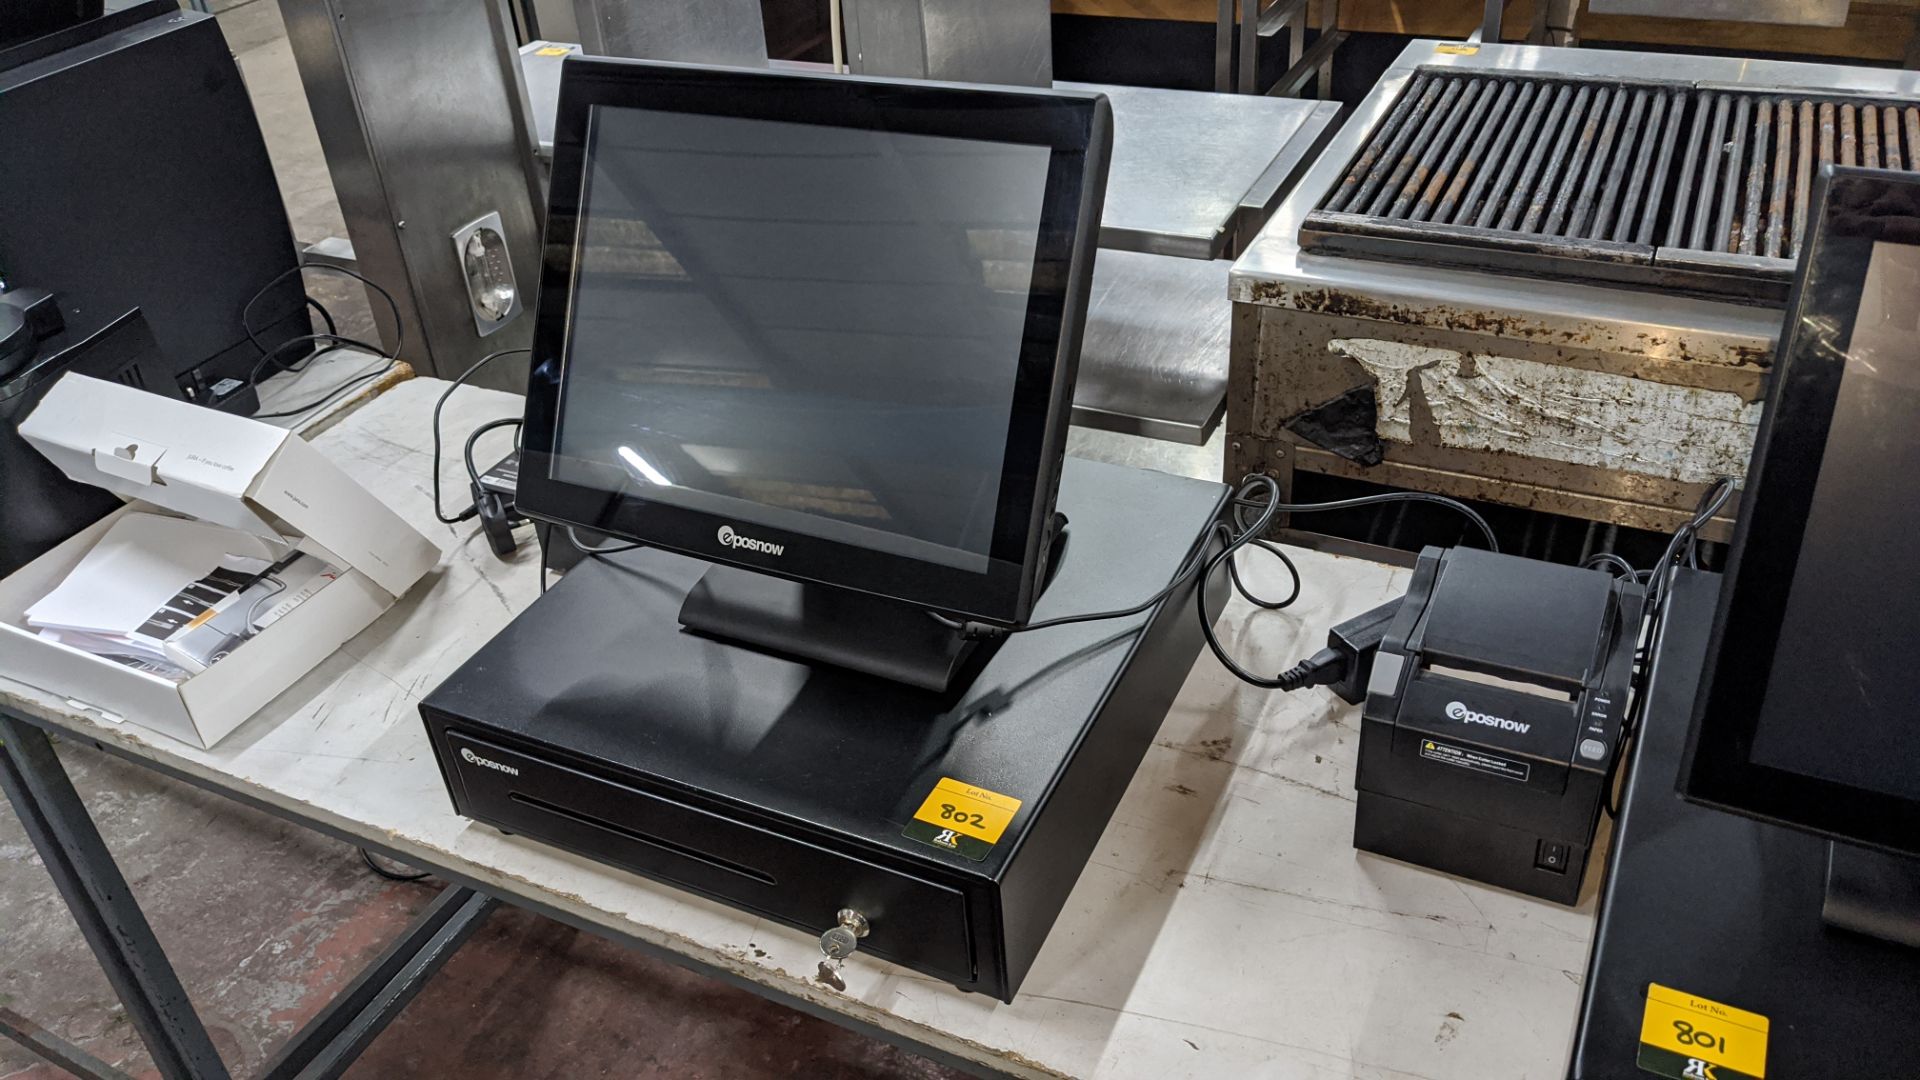 EPOS system comprising EPOSNOW touchscreen terminal with built-in card reader model Pro-C15, EPOSNOW - Image 8 of 12